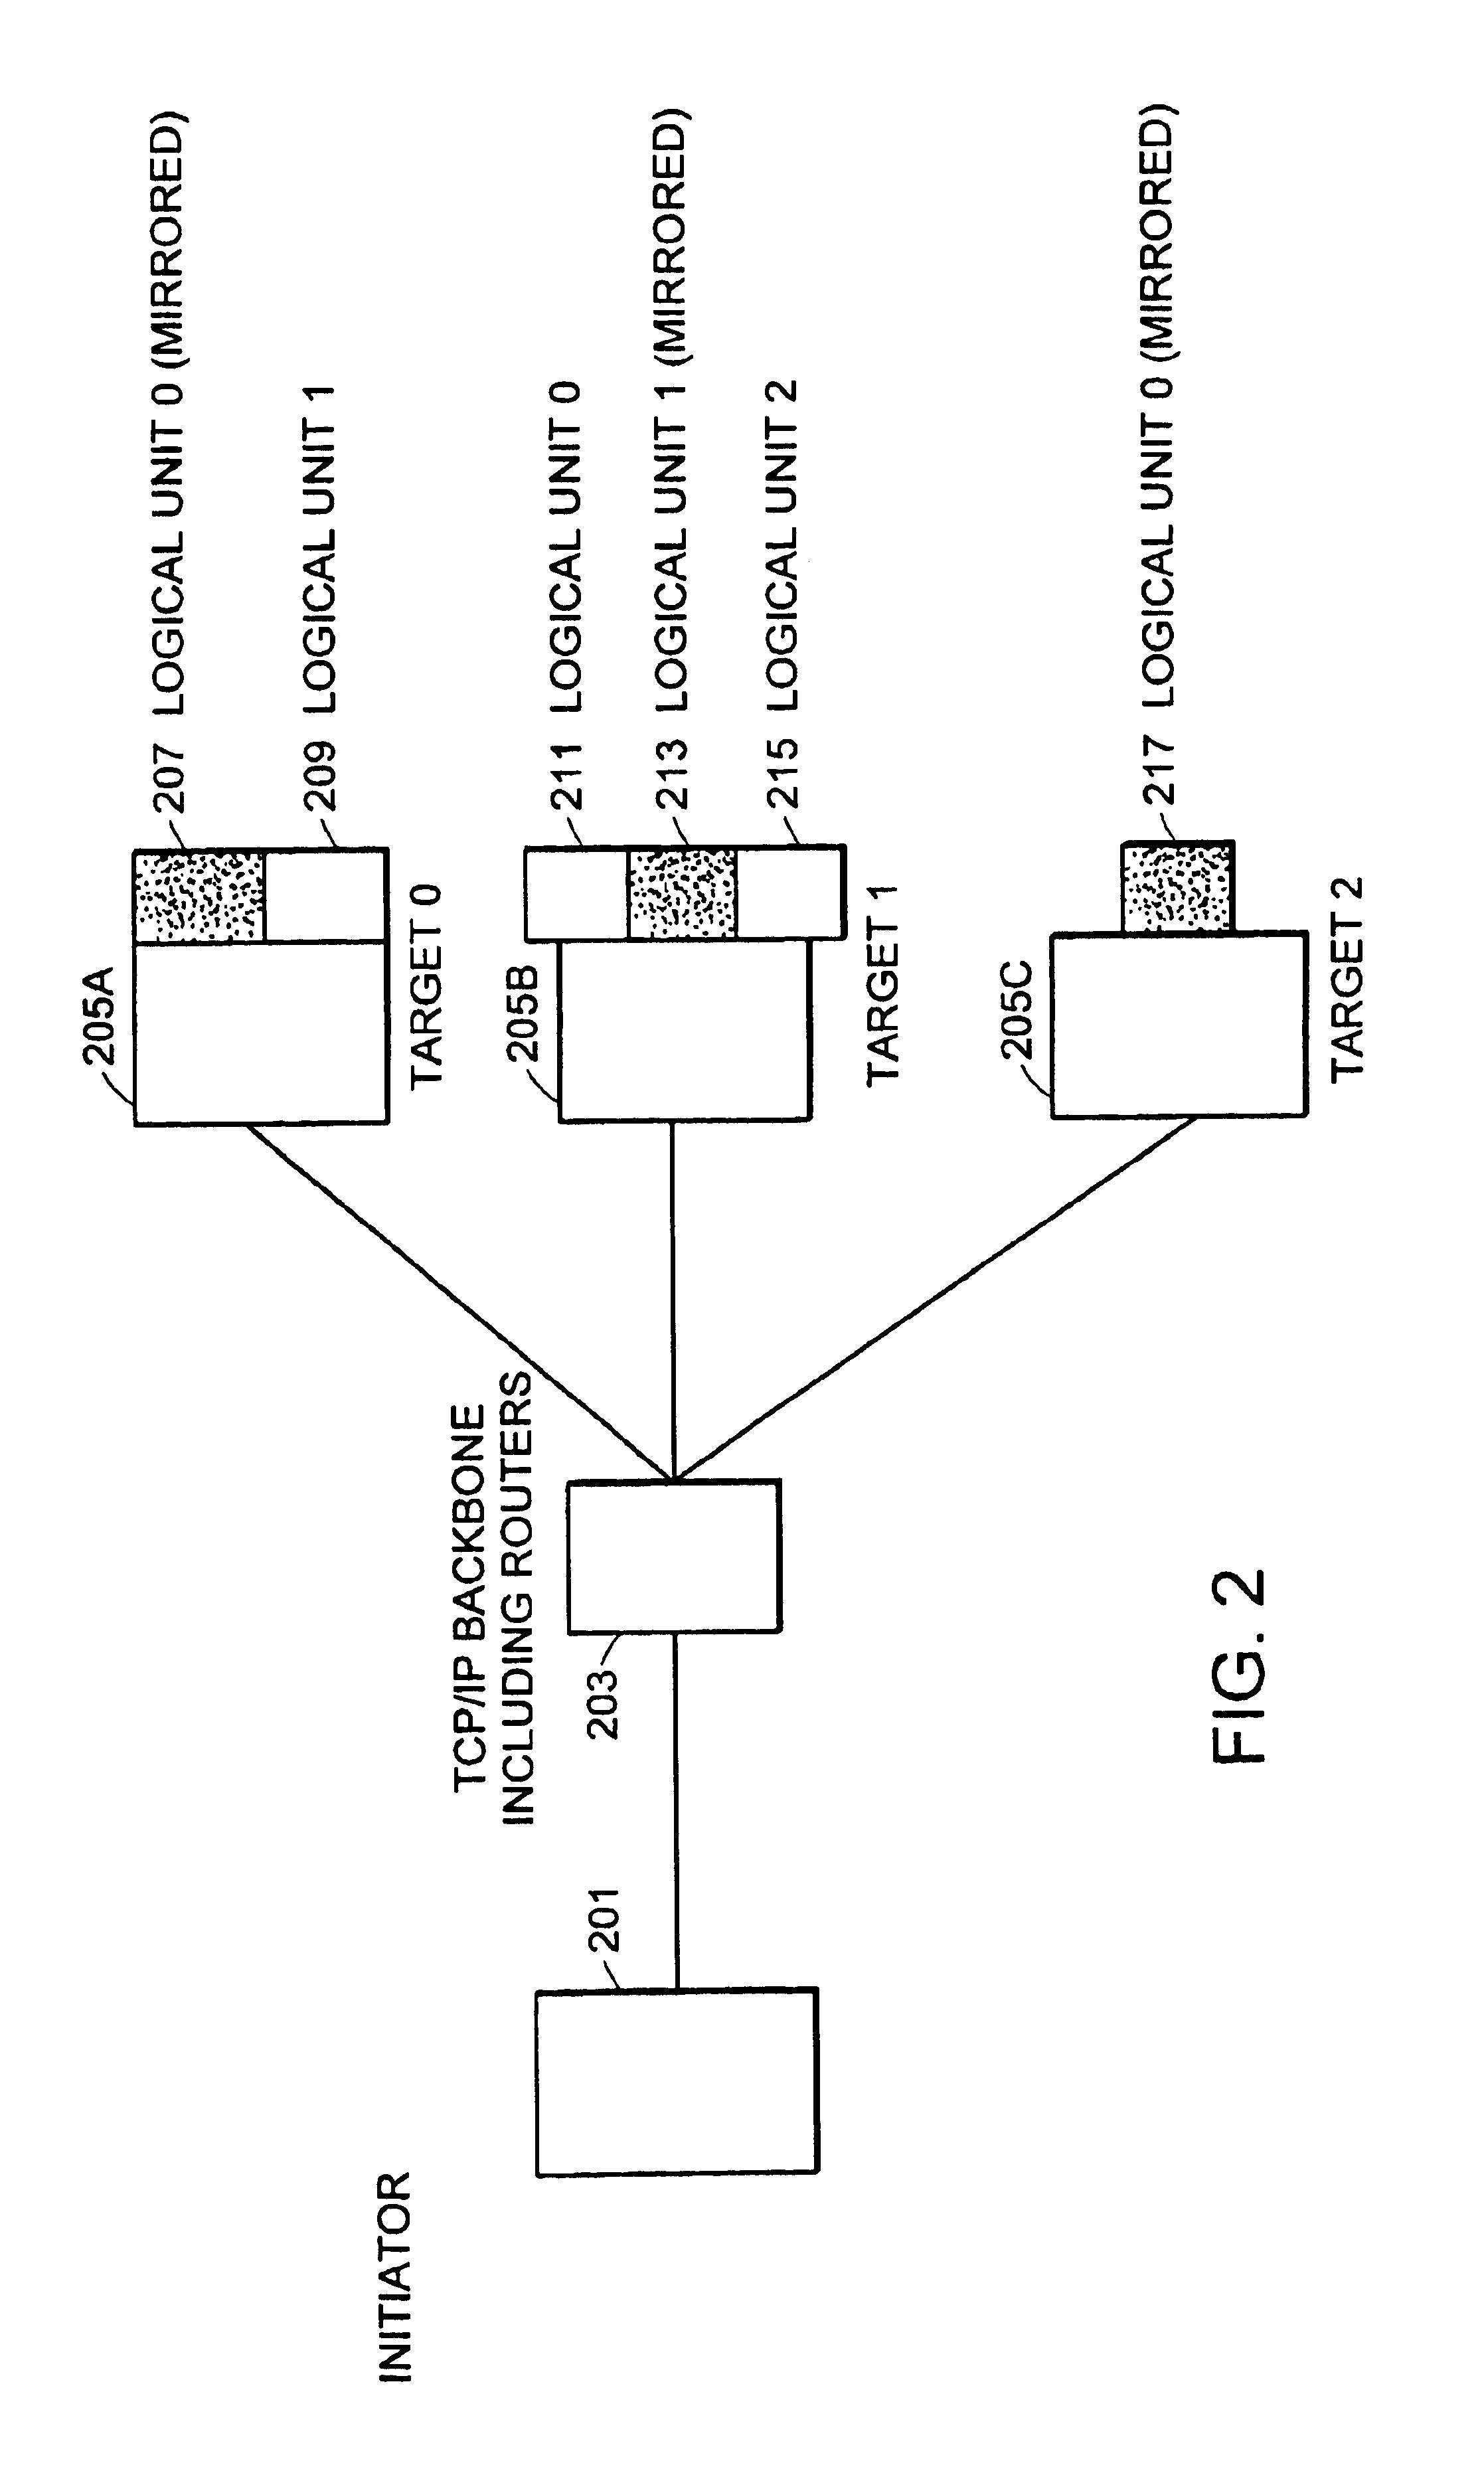 System maps SCSI device with virtual logical unit number and multicast address for efficient data replication over TCP/IP network